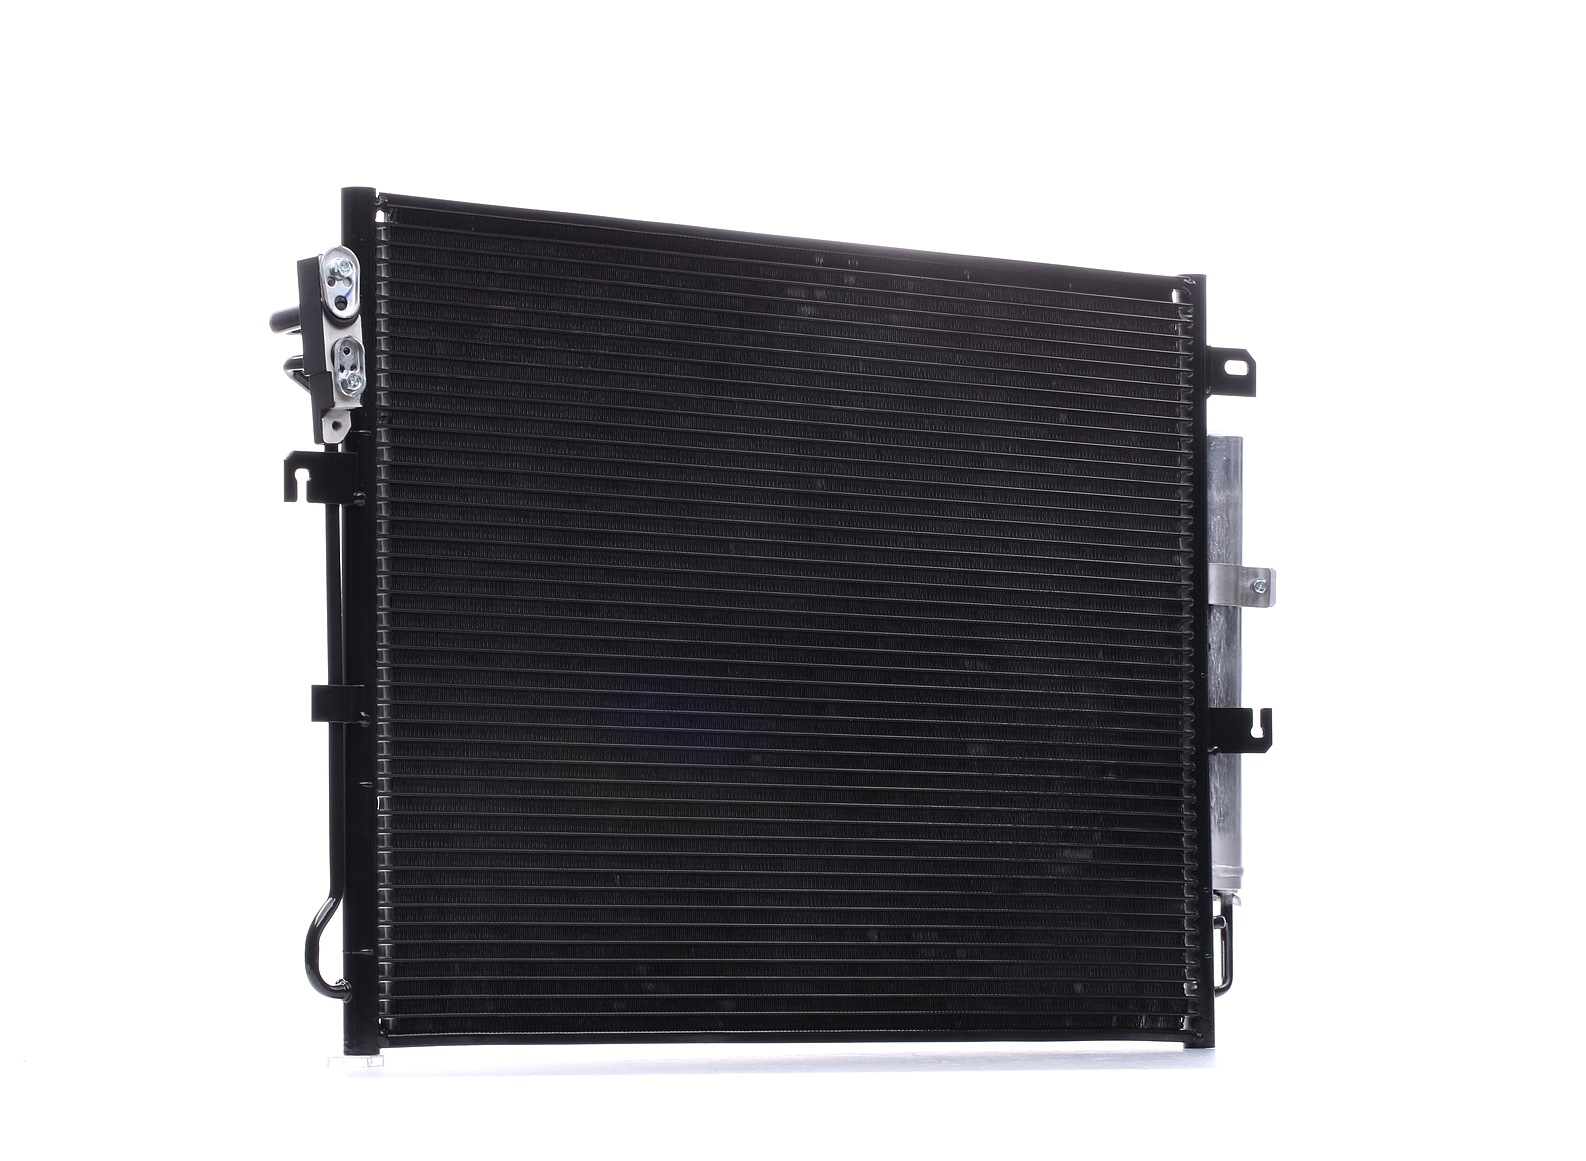 Land Rover Air conditioning condenser STARK SKCD-0110574 at a good price